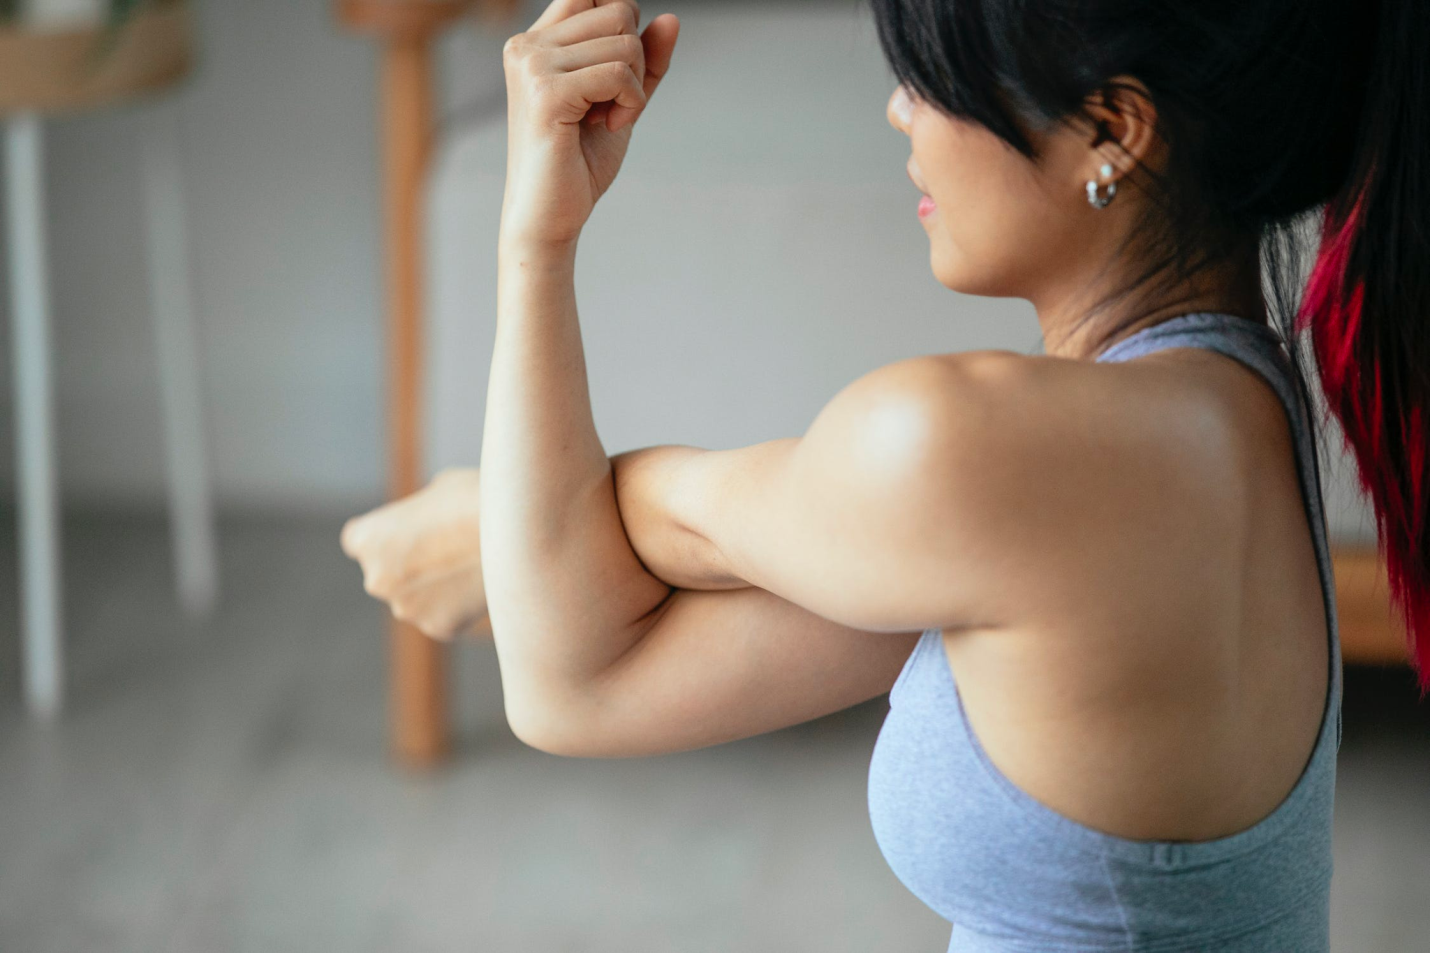 A woman crosses her arm while stretching it across her body.